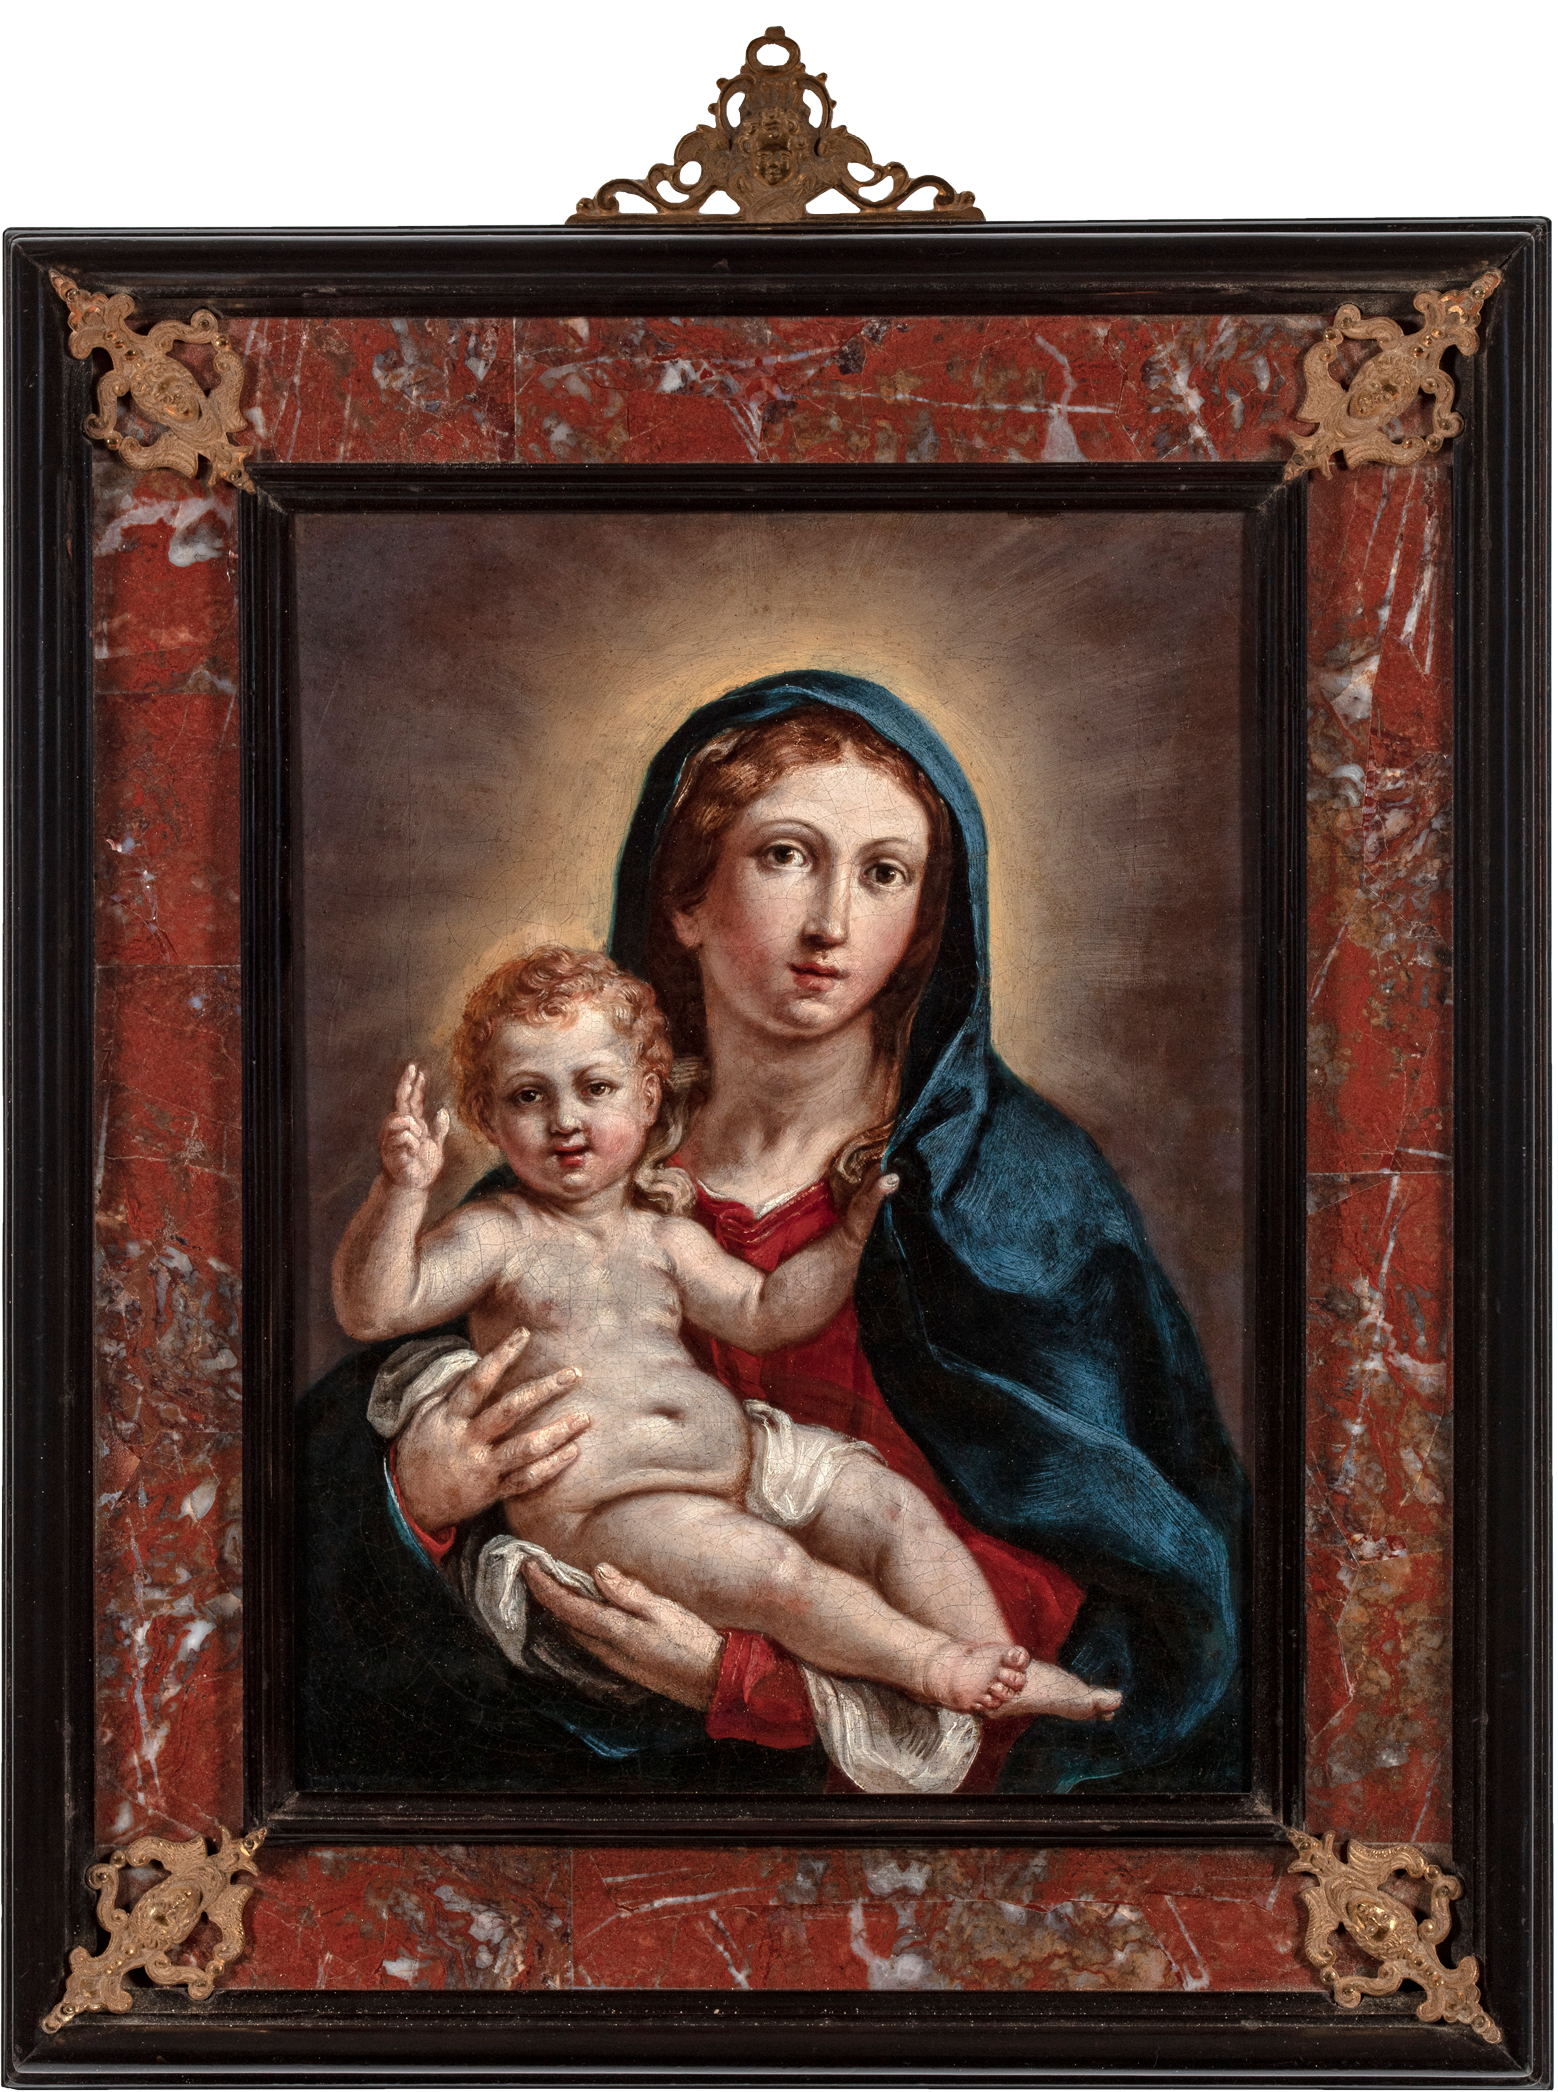 Madonna and Child with a resplendent halo behind them.